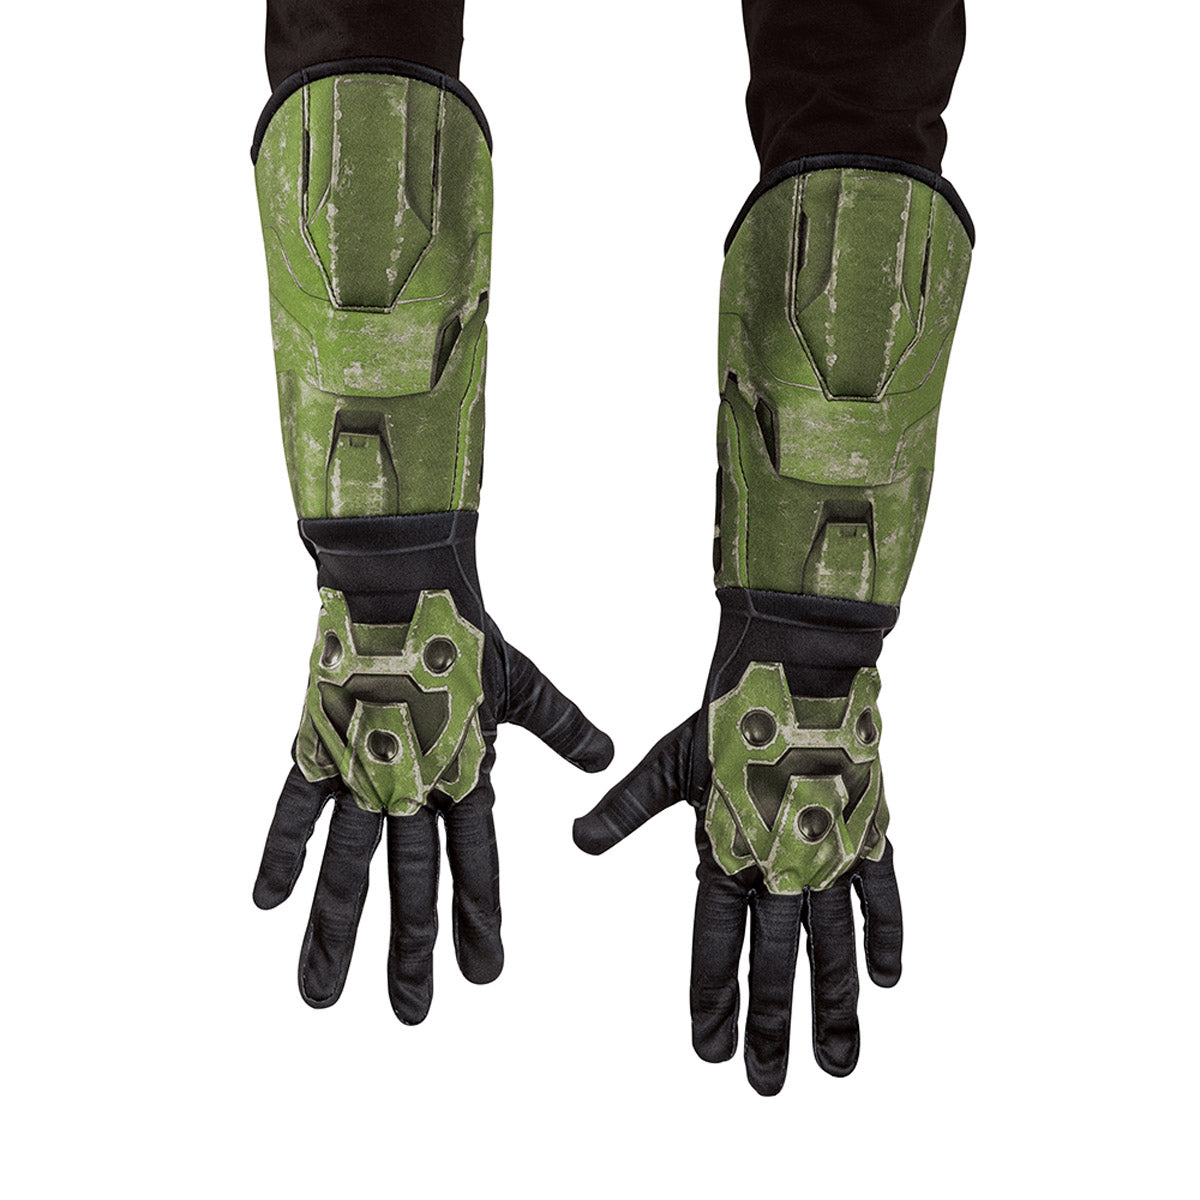 Master Chief Infinite Deluxe Gloves Disguise 105079